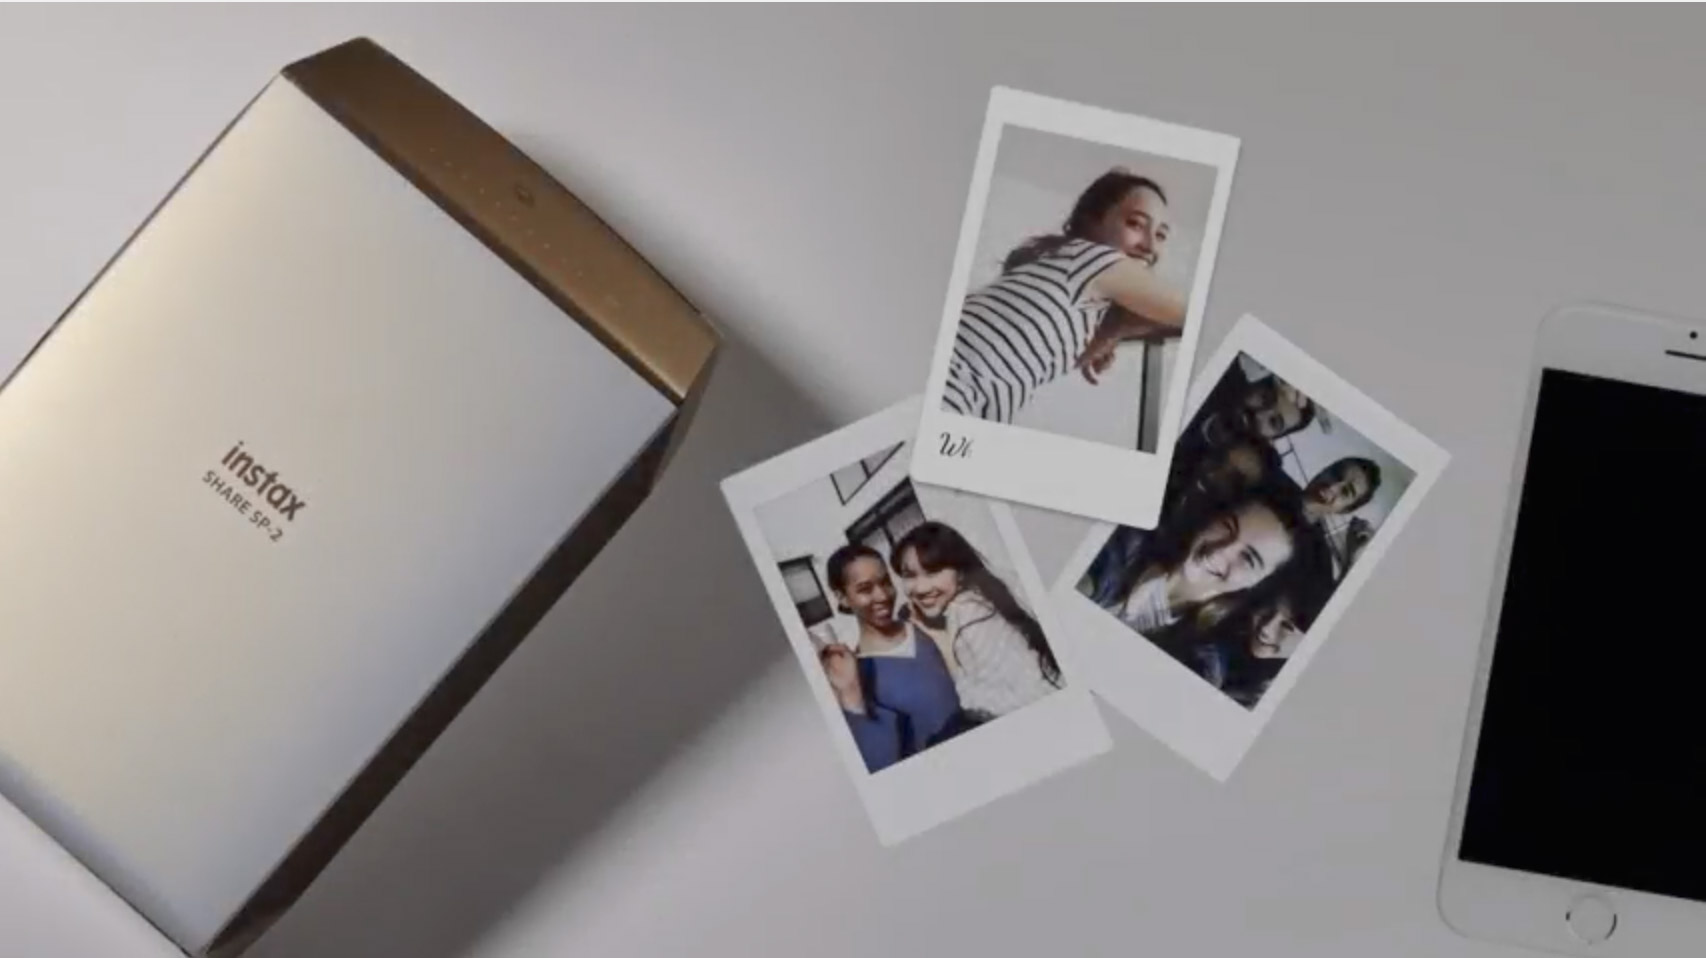 Instax Printer Gets a Redesigned Body,